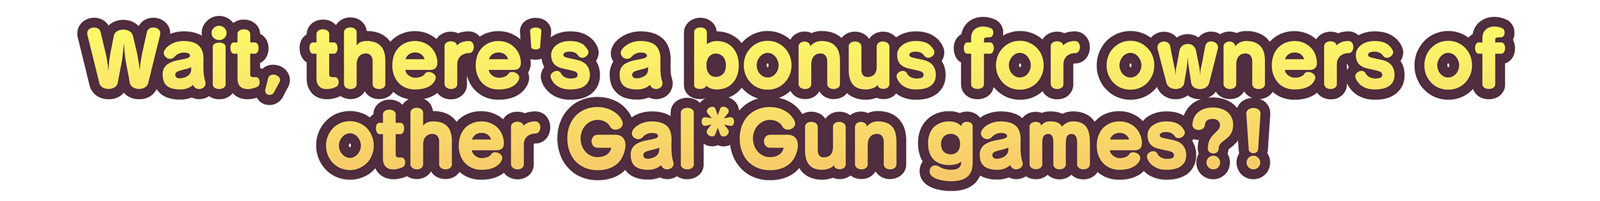 Wait, there's a bonus for owners of other Gal*Gun games?!